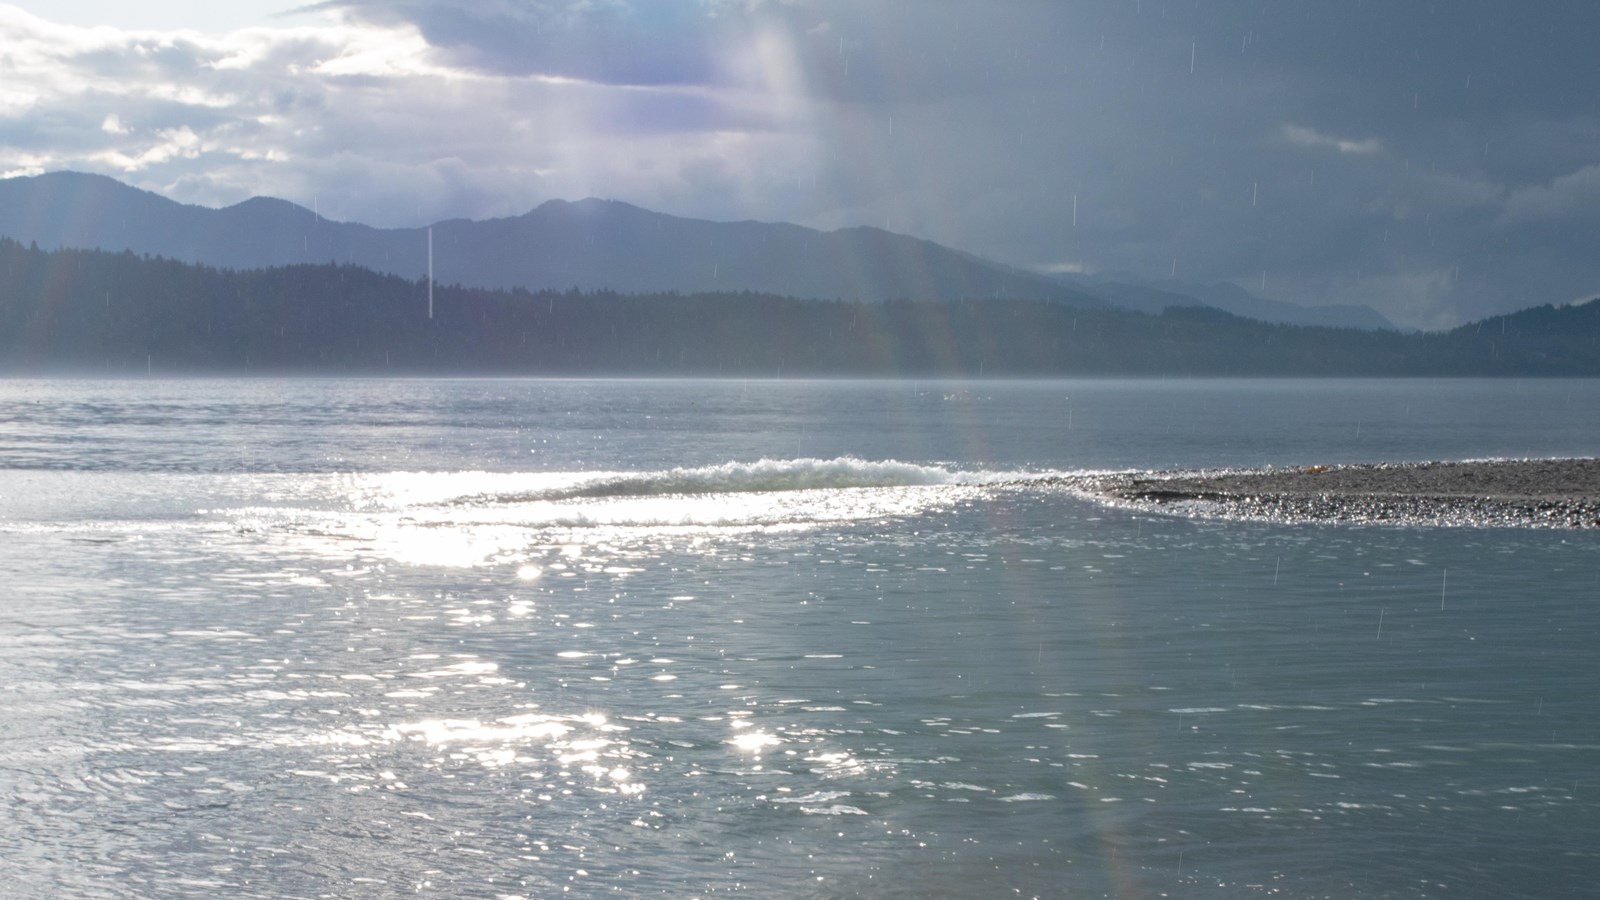 A shimmering body of water, with a gravel bar visible off shore and mountains past the far shore.